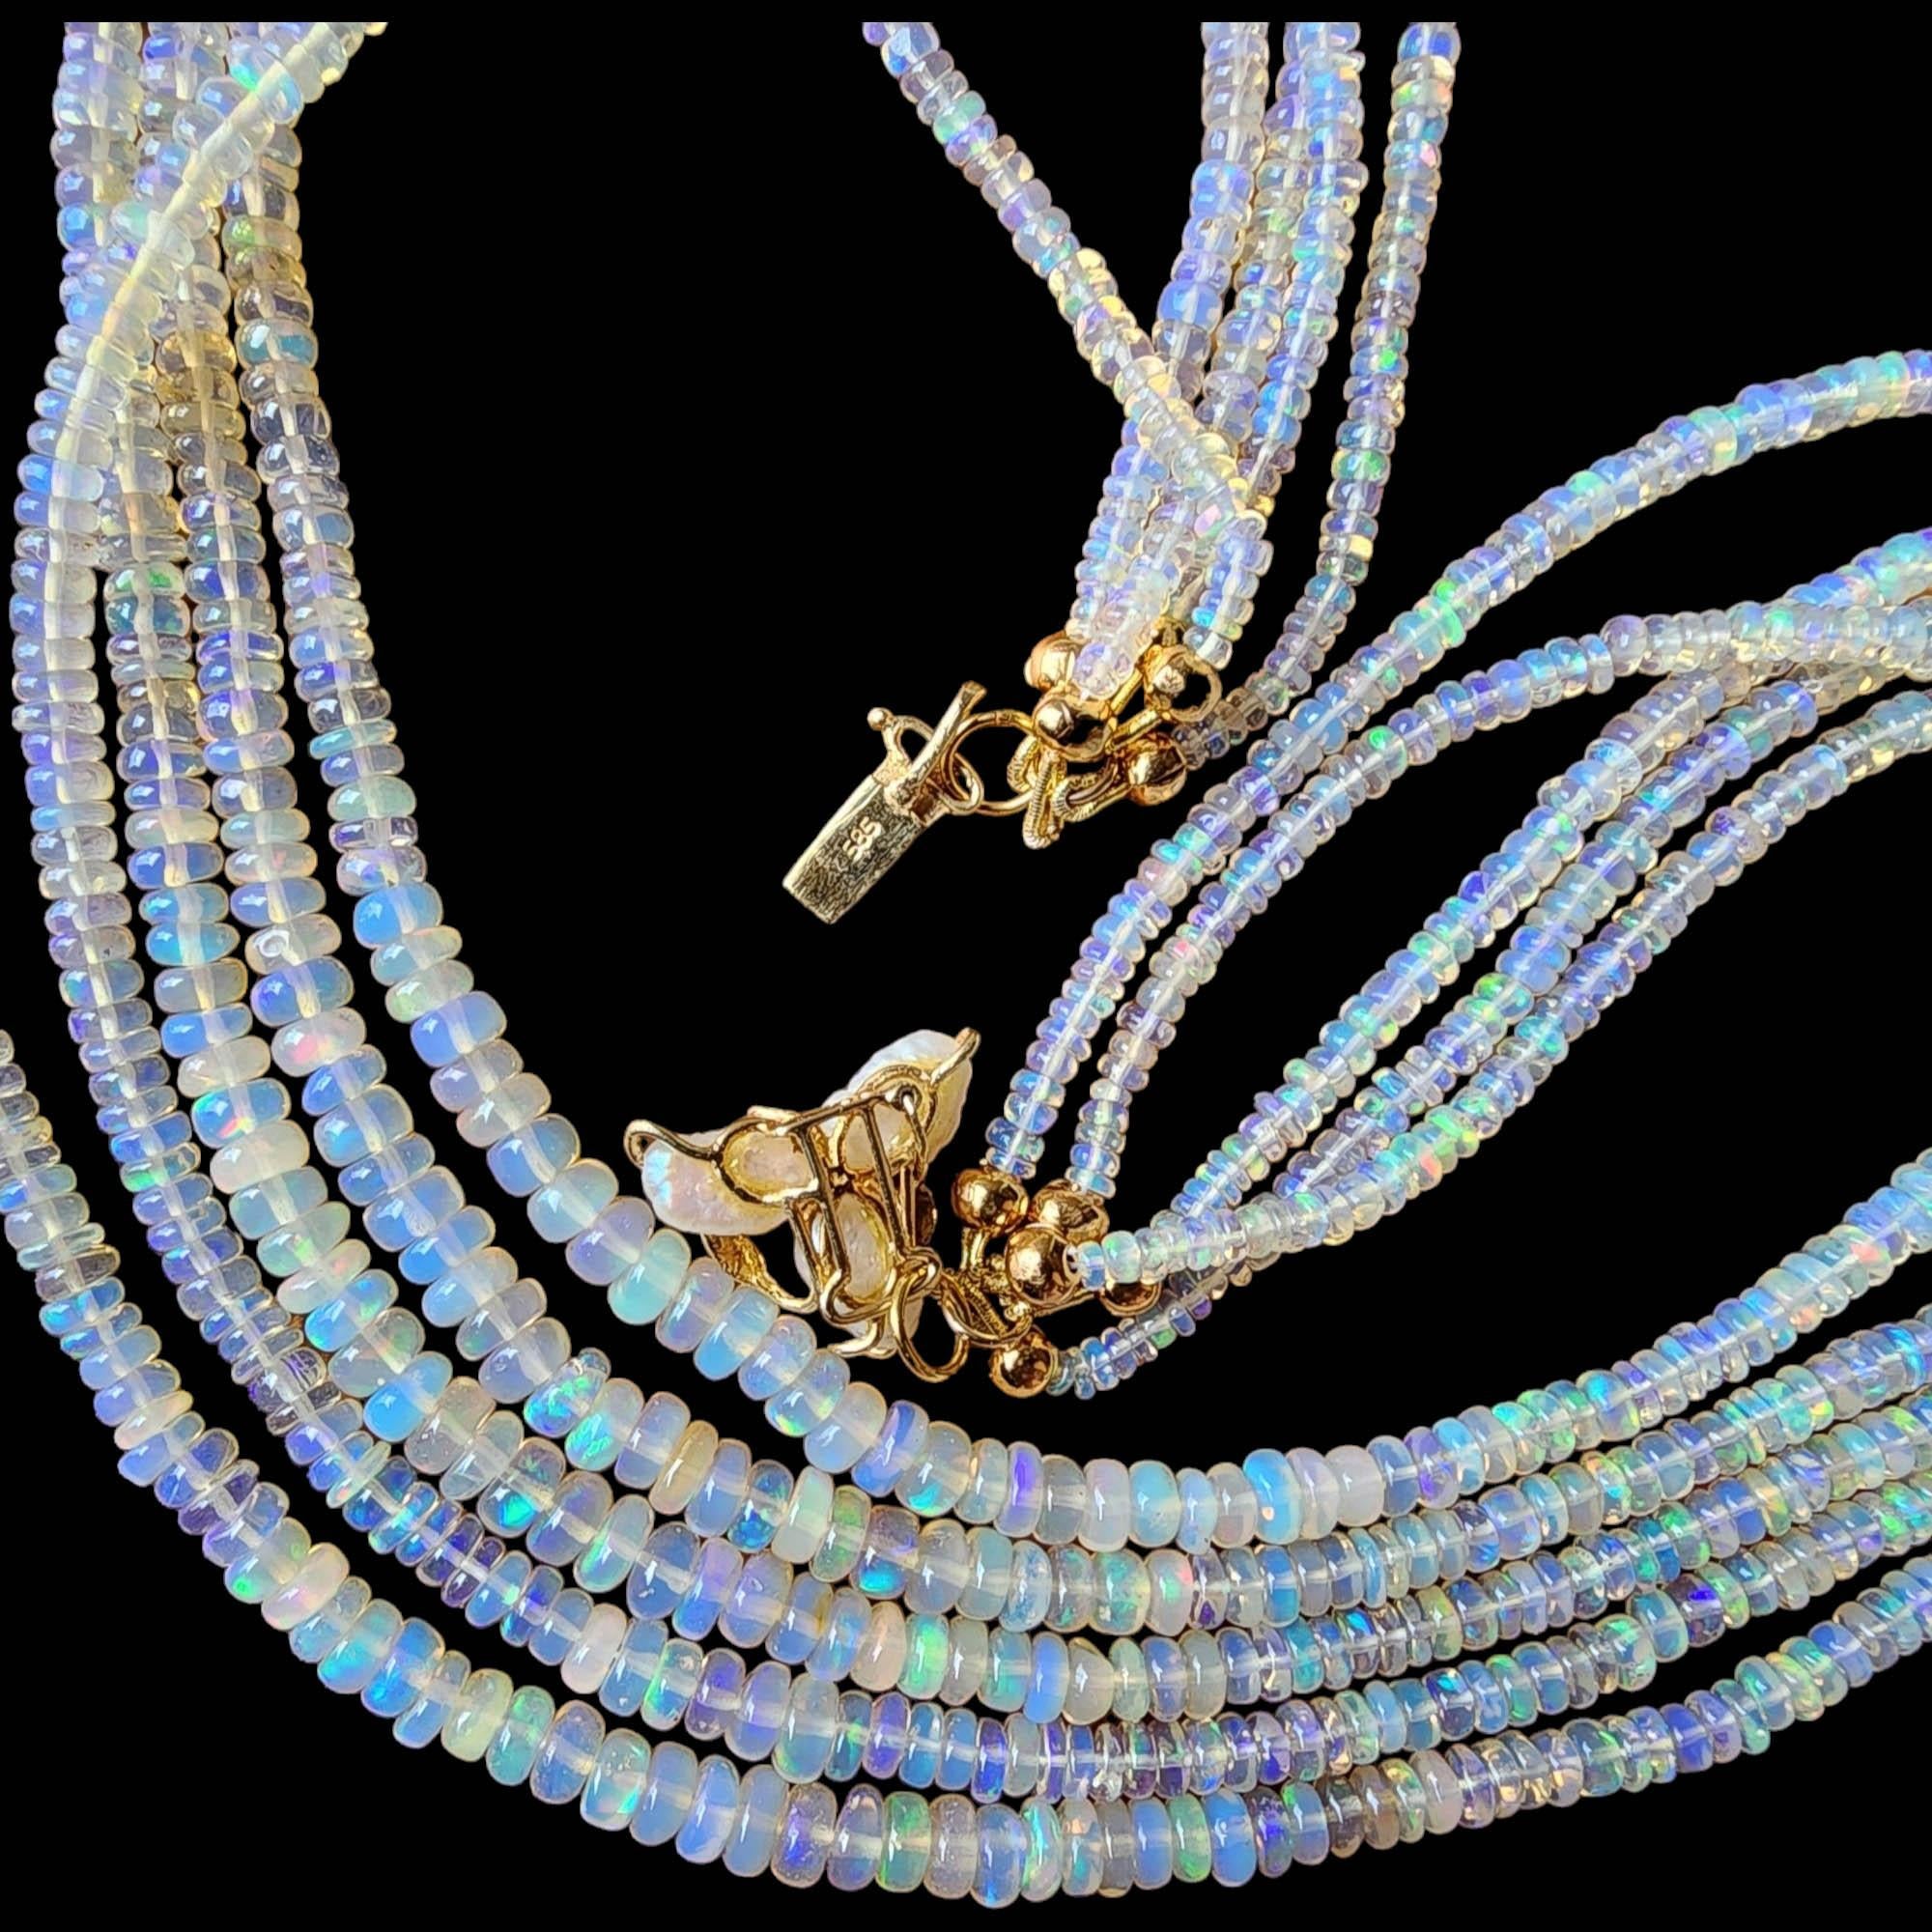 Vintage Multi-Strand Opal Bead Necklace, 14k Gold Clasp With Pearls For Sale 1